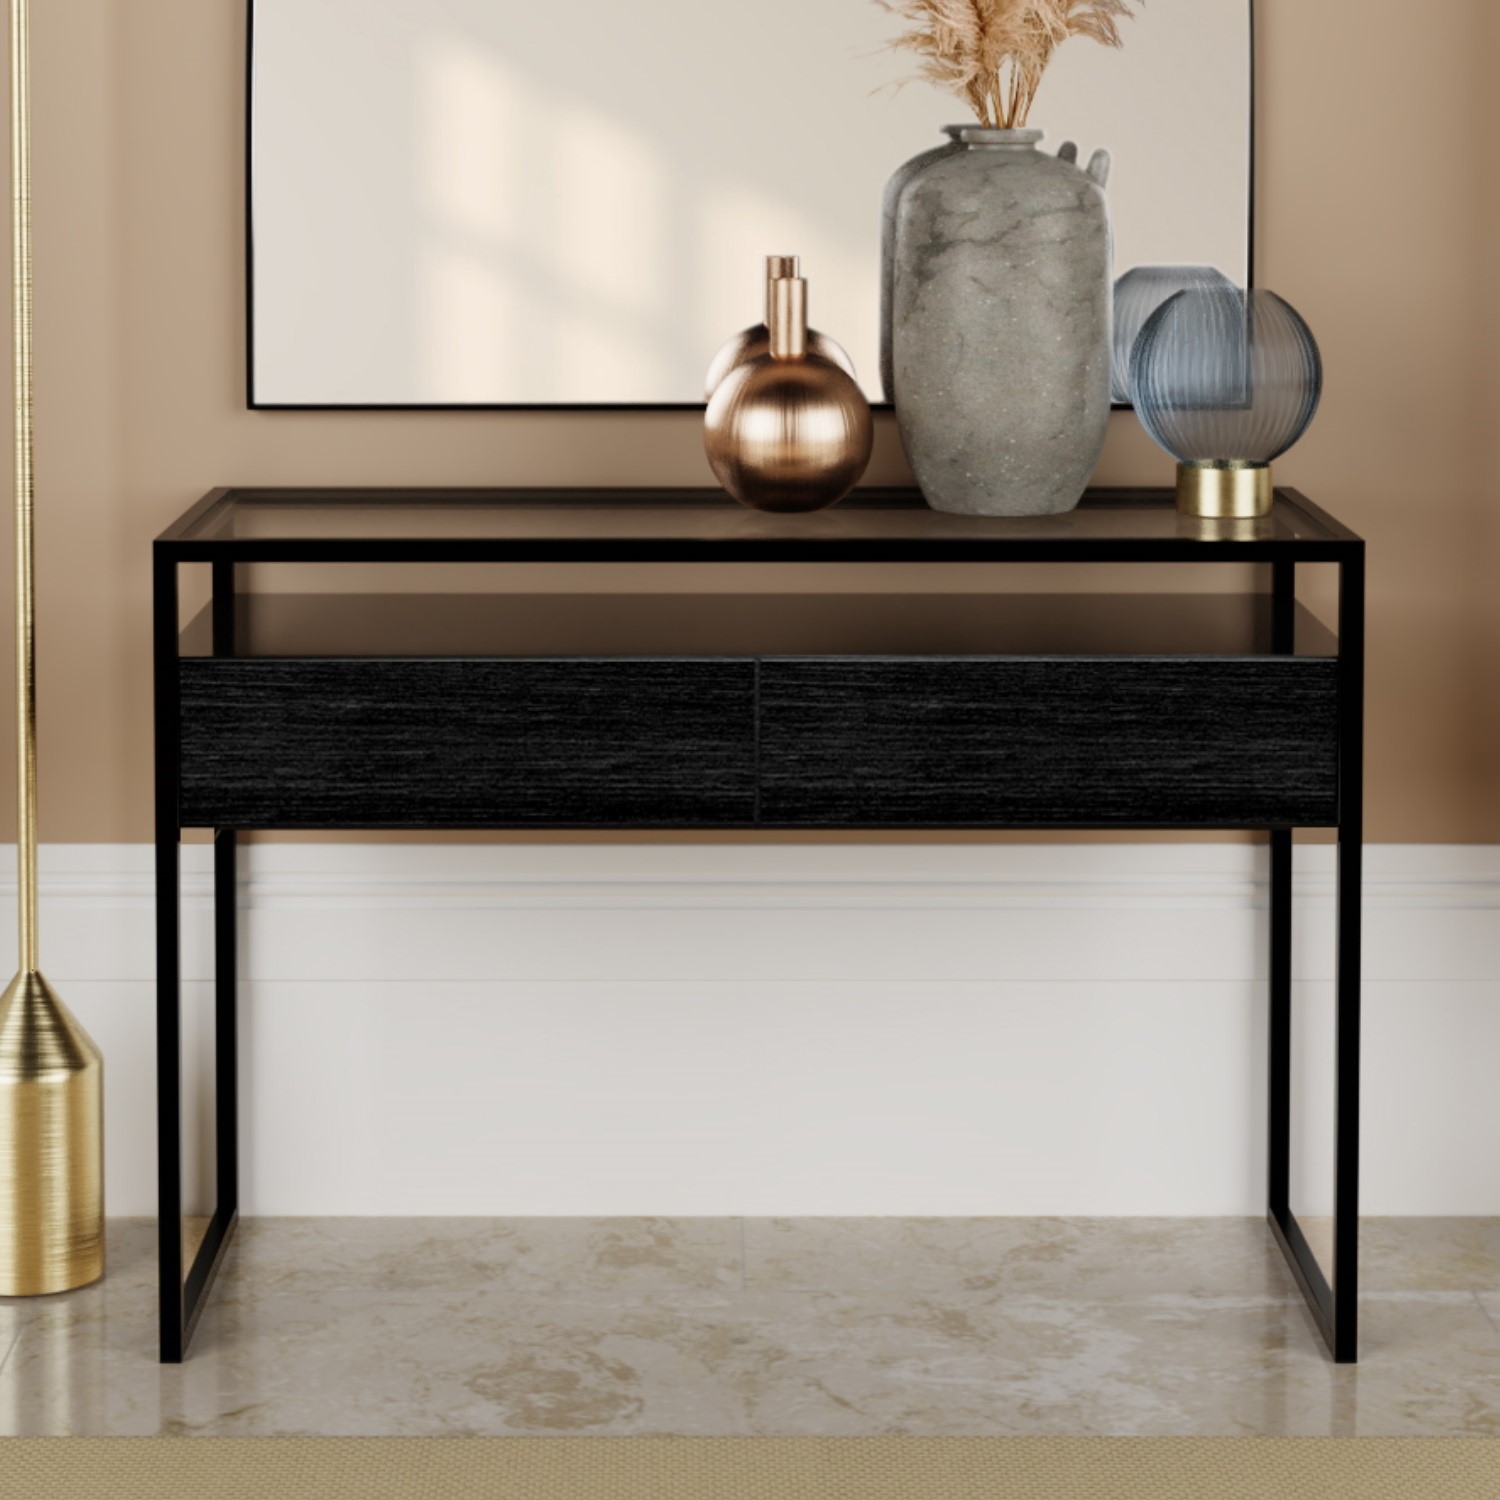 Photo of Large black glass top console table with drawers & black legs - akila